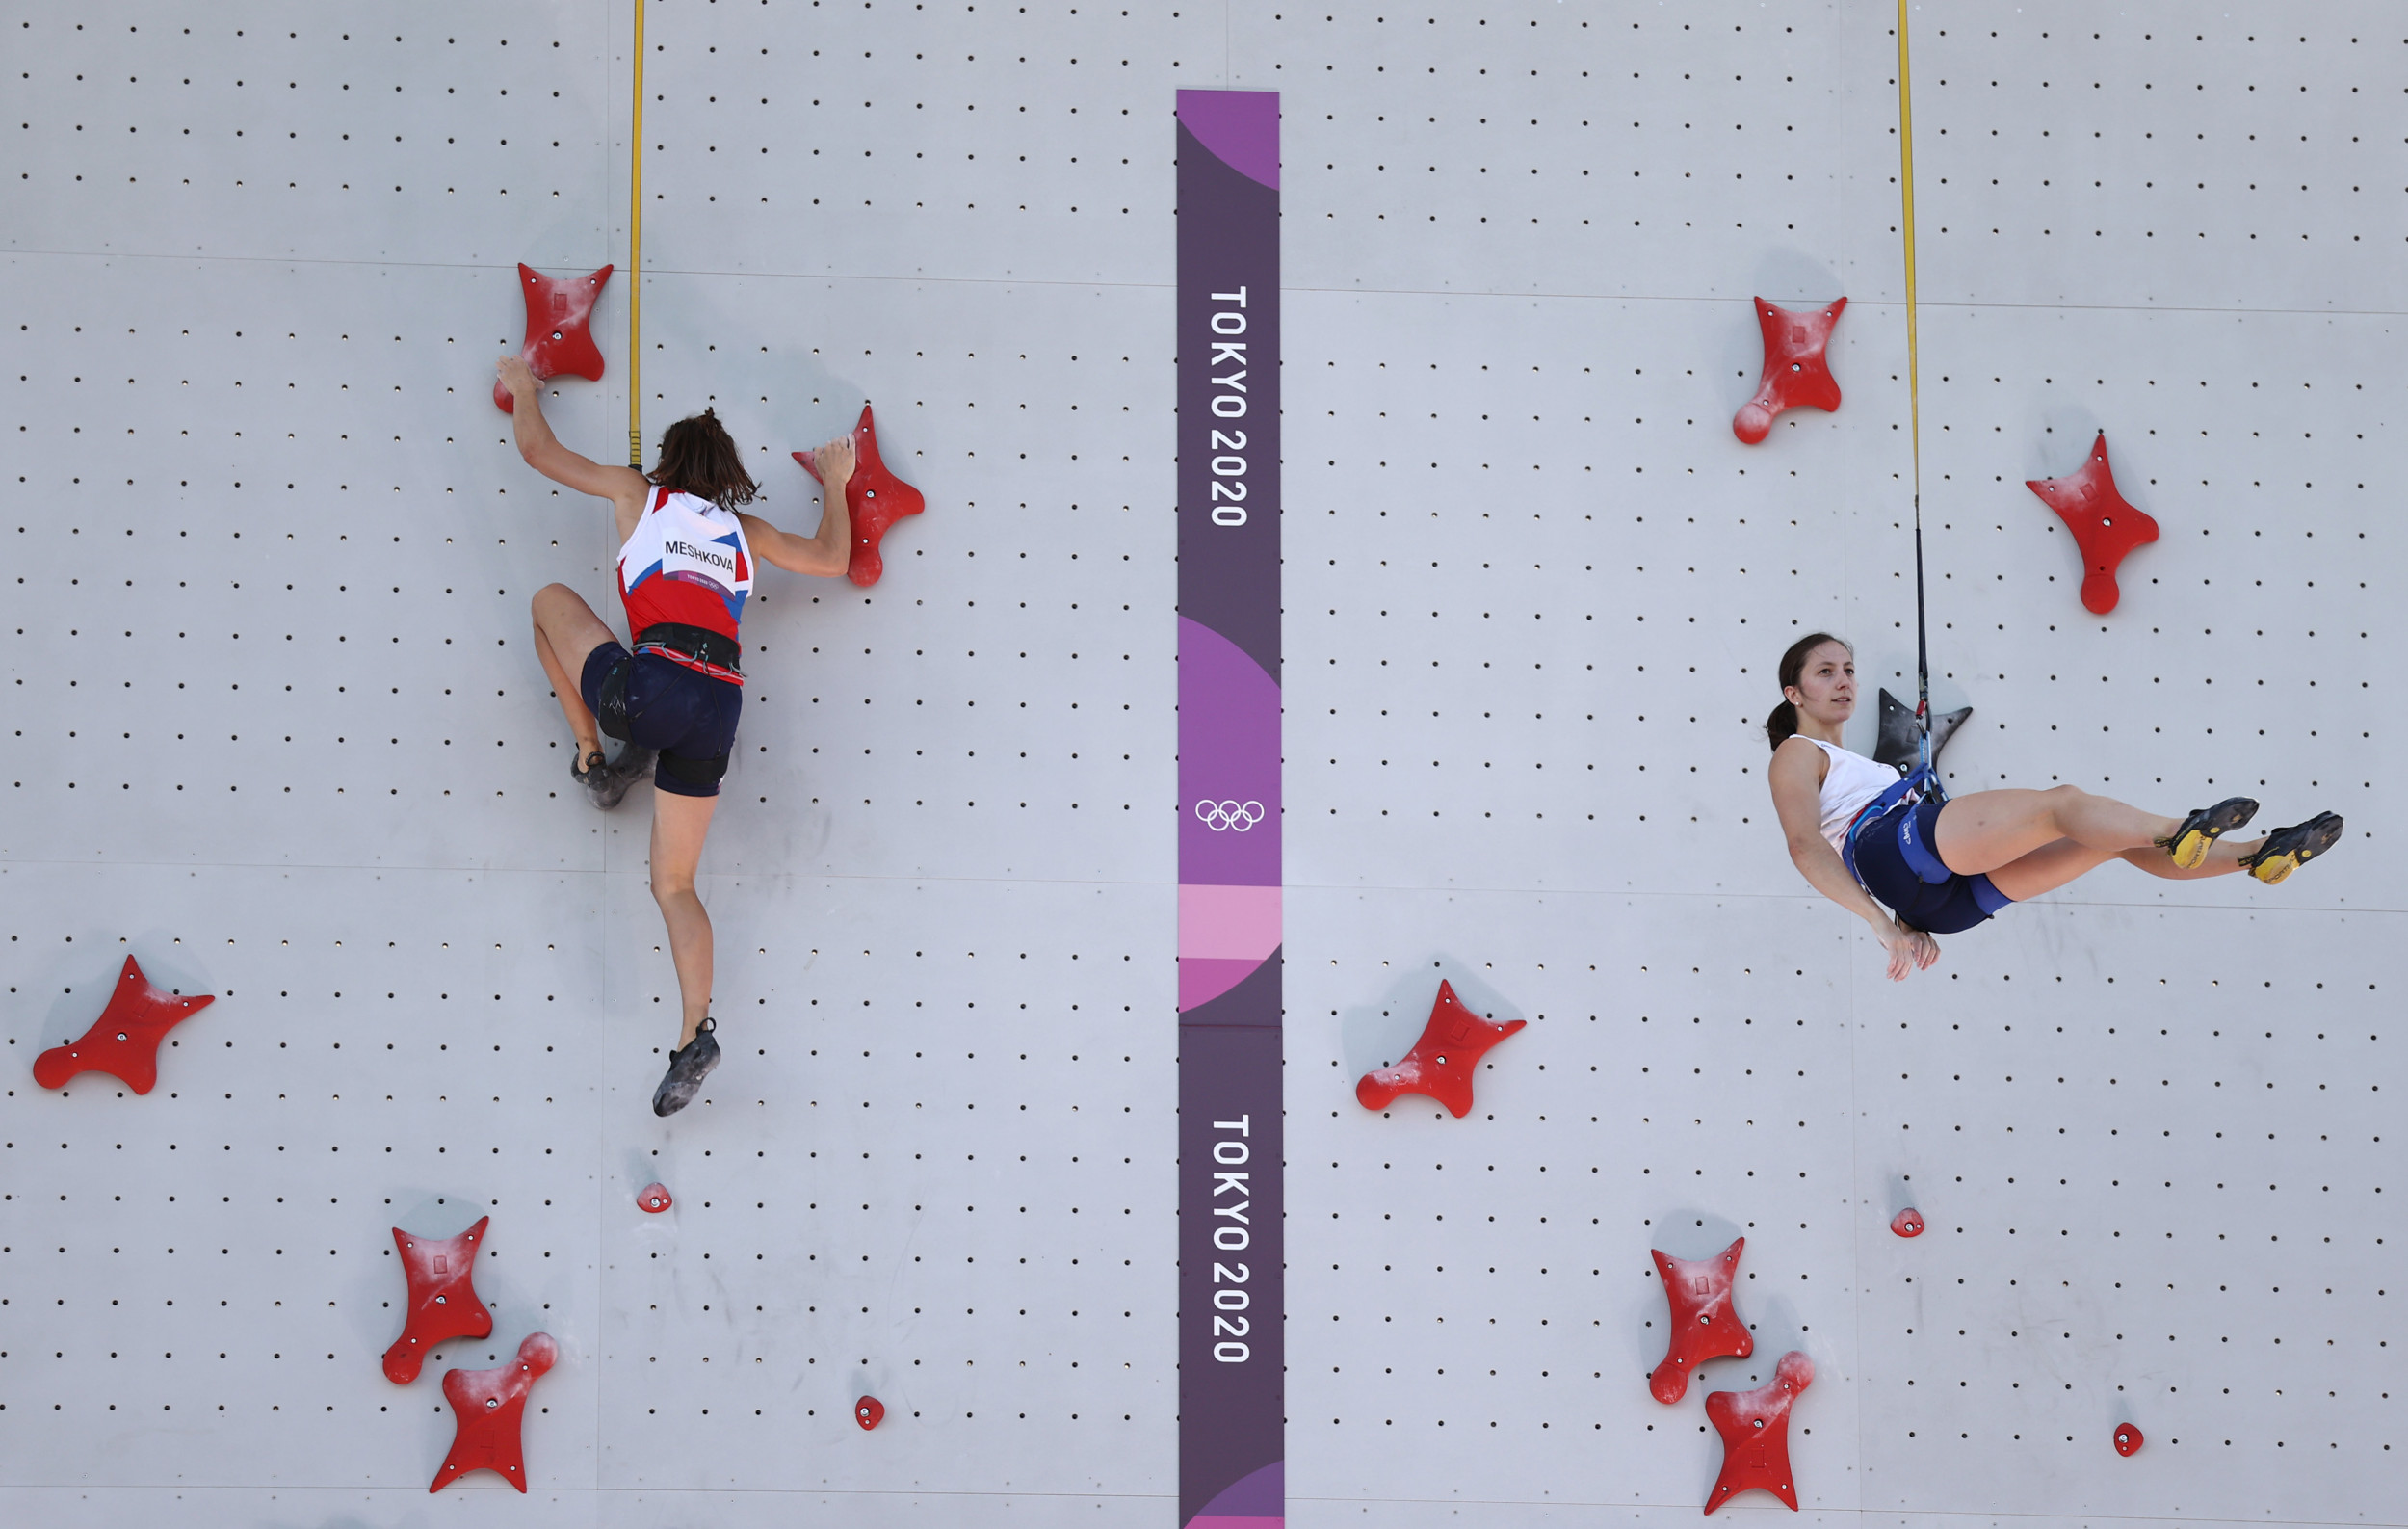 Climbing makes its Olympic debut